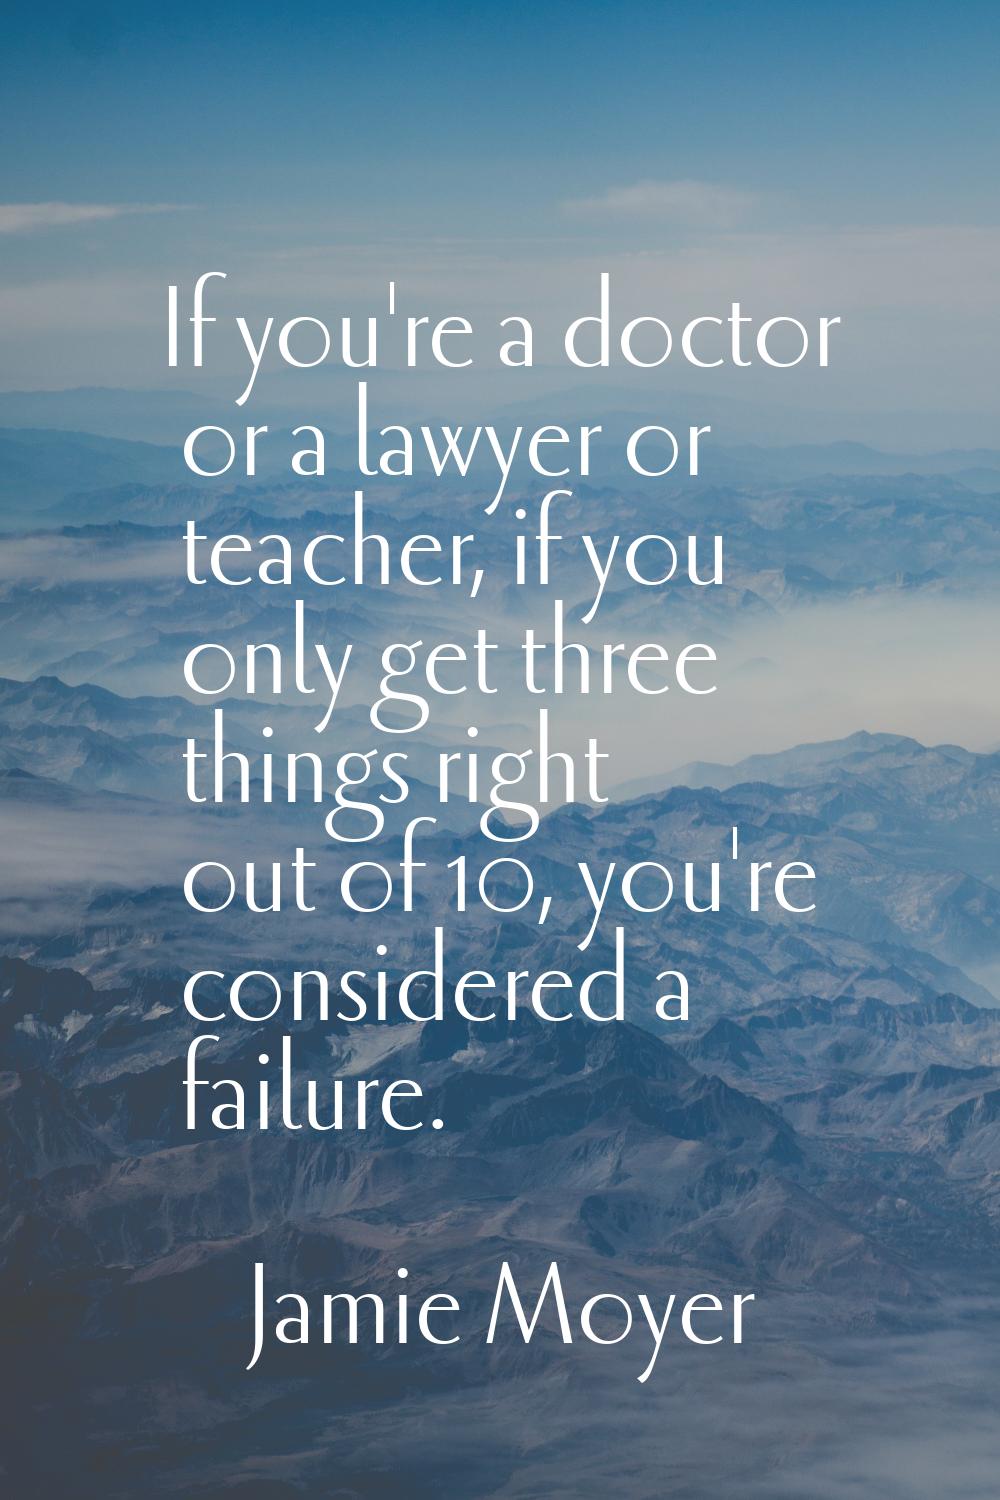 If you're a doctor or a lawyer or teacher, if you only get three things right out of 10, you're con